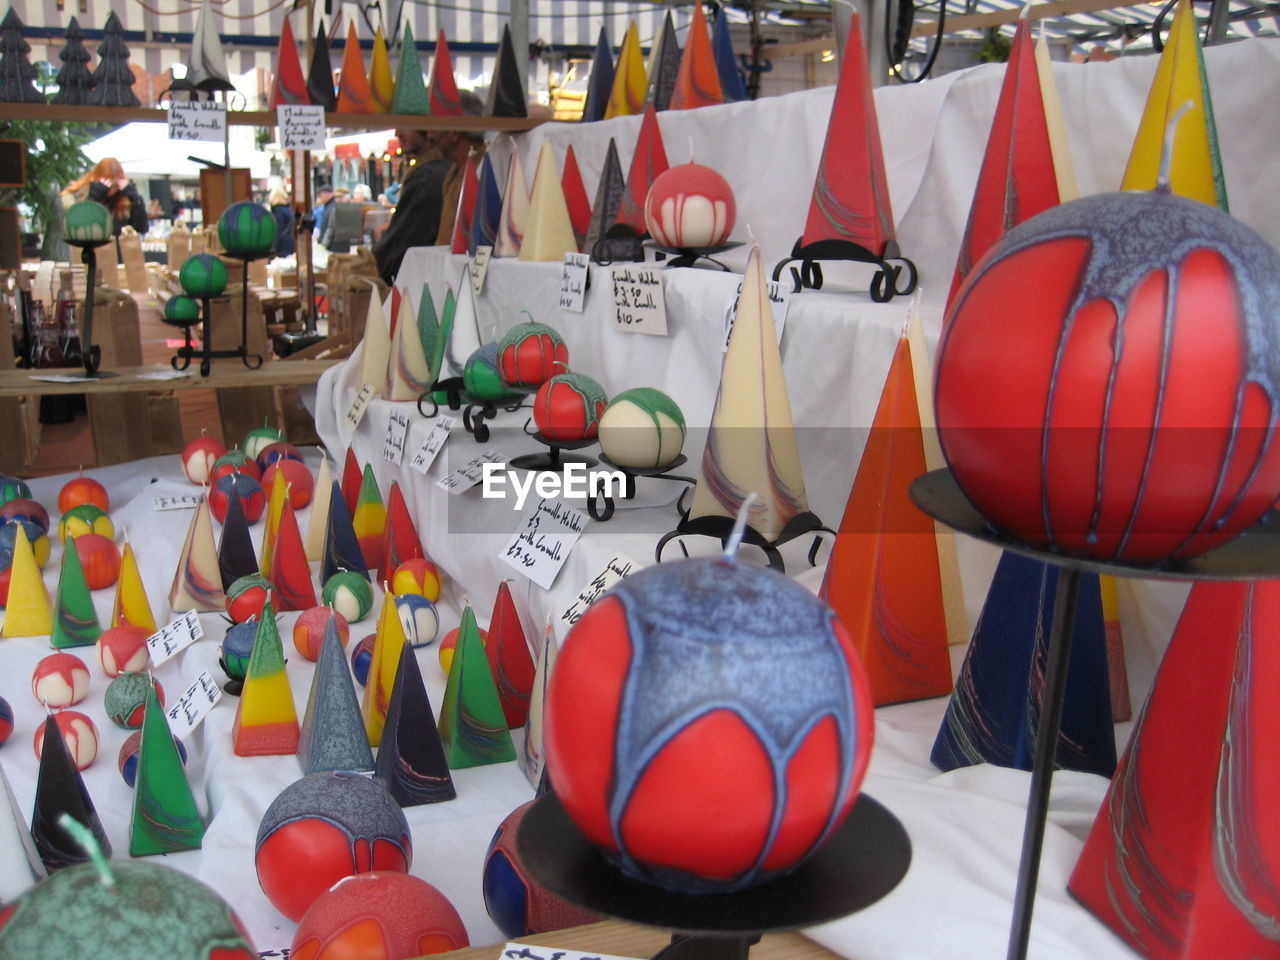 MULTI COLORED HANGING FOR SALE IN MARKET STALL